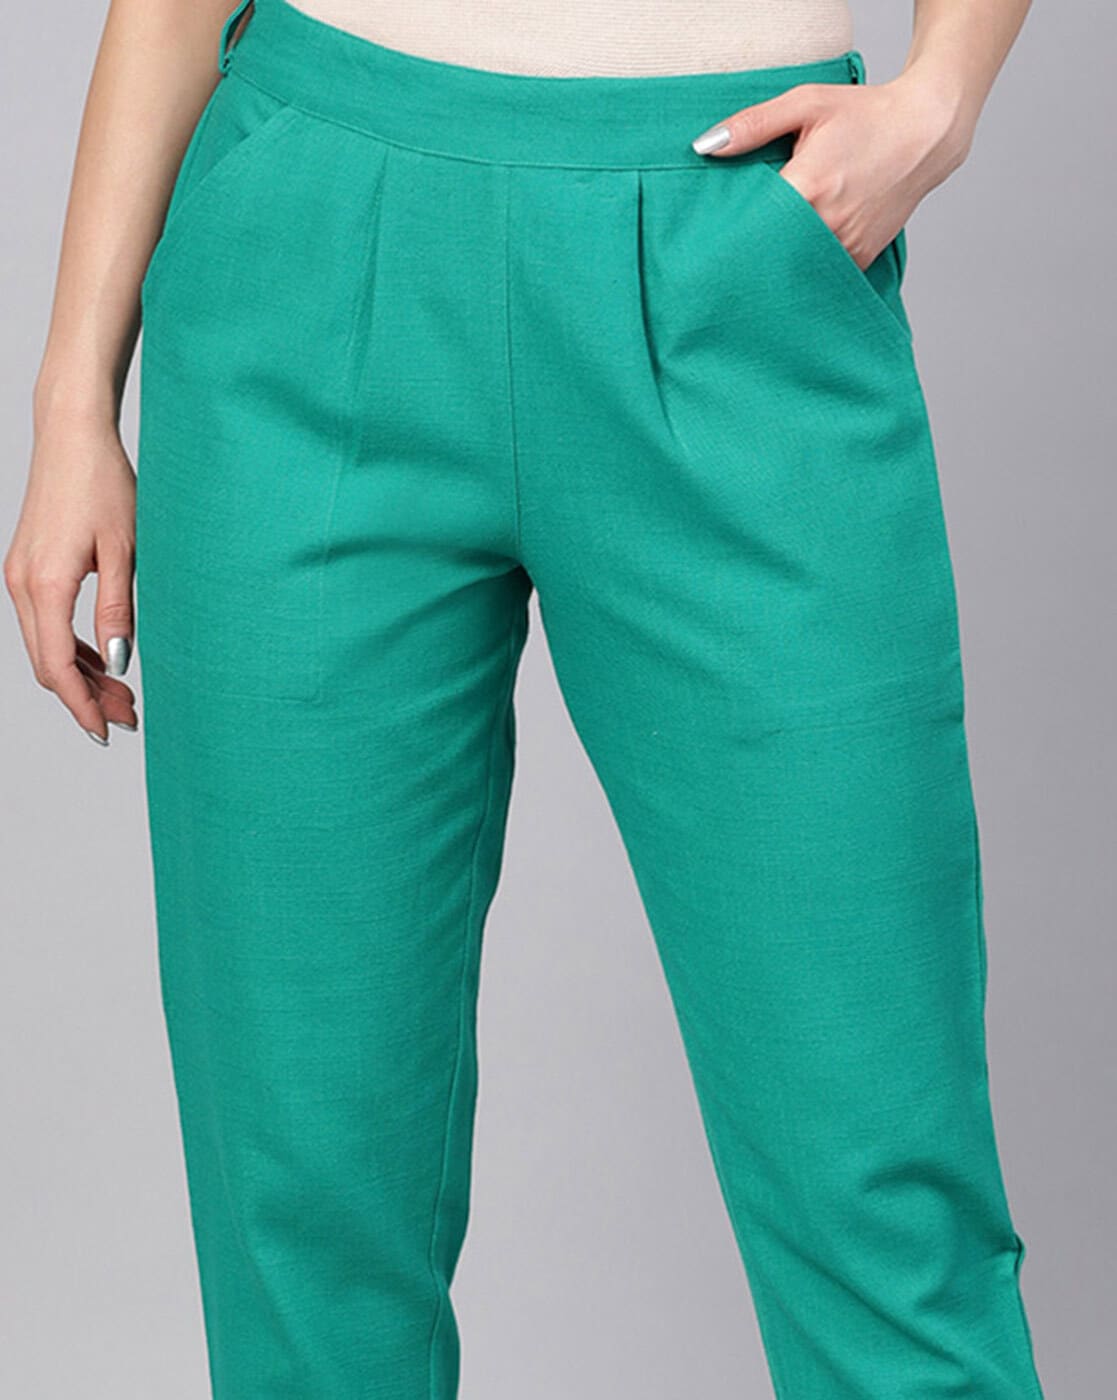 Plain Green Ladies Cotton Casual Pants at Rs 280/piece in Jaipur